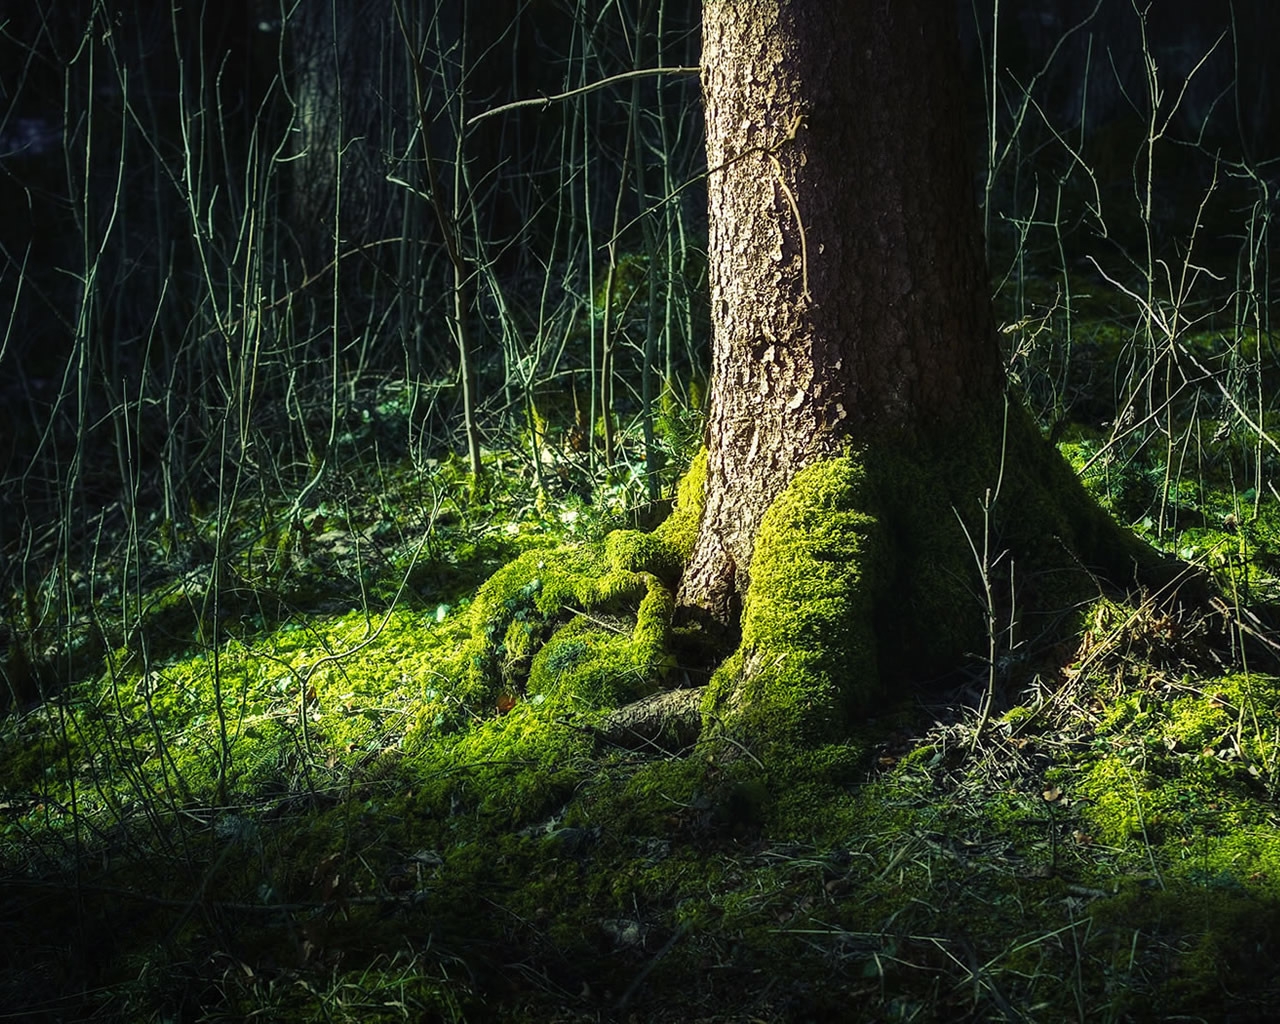 Trunk surrounded by grass for 1280 x 1024 resolution